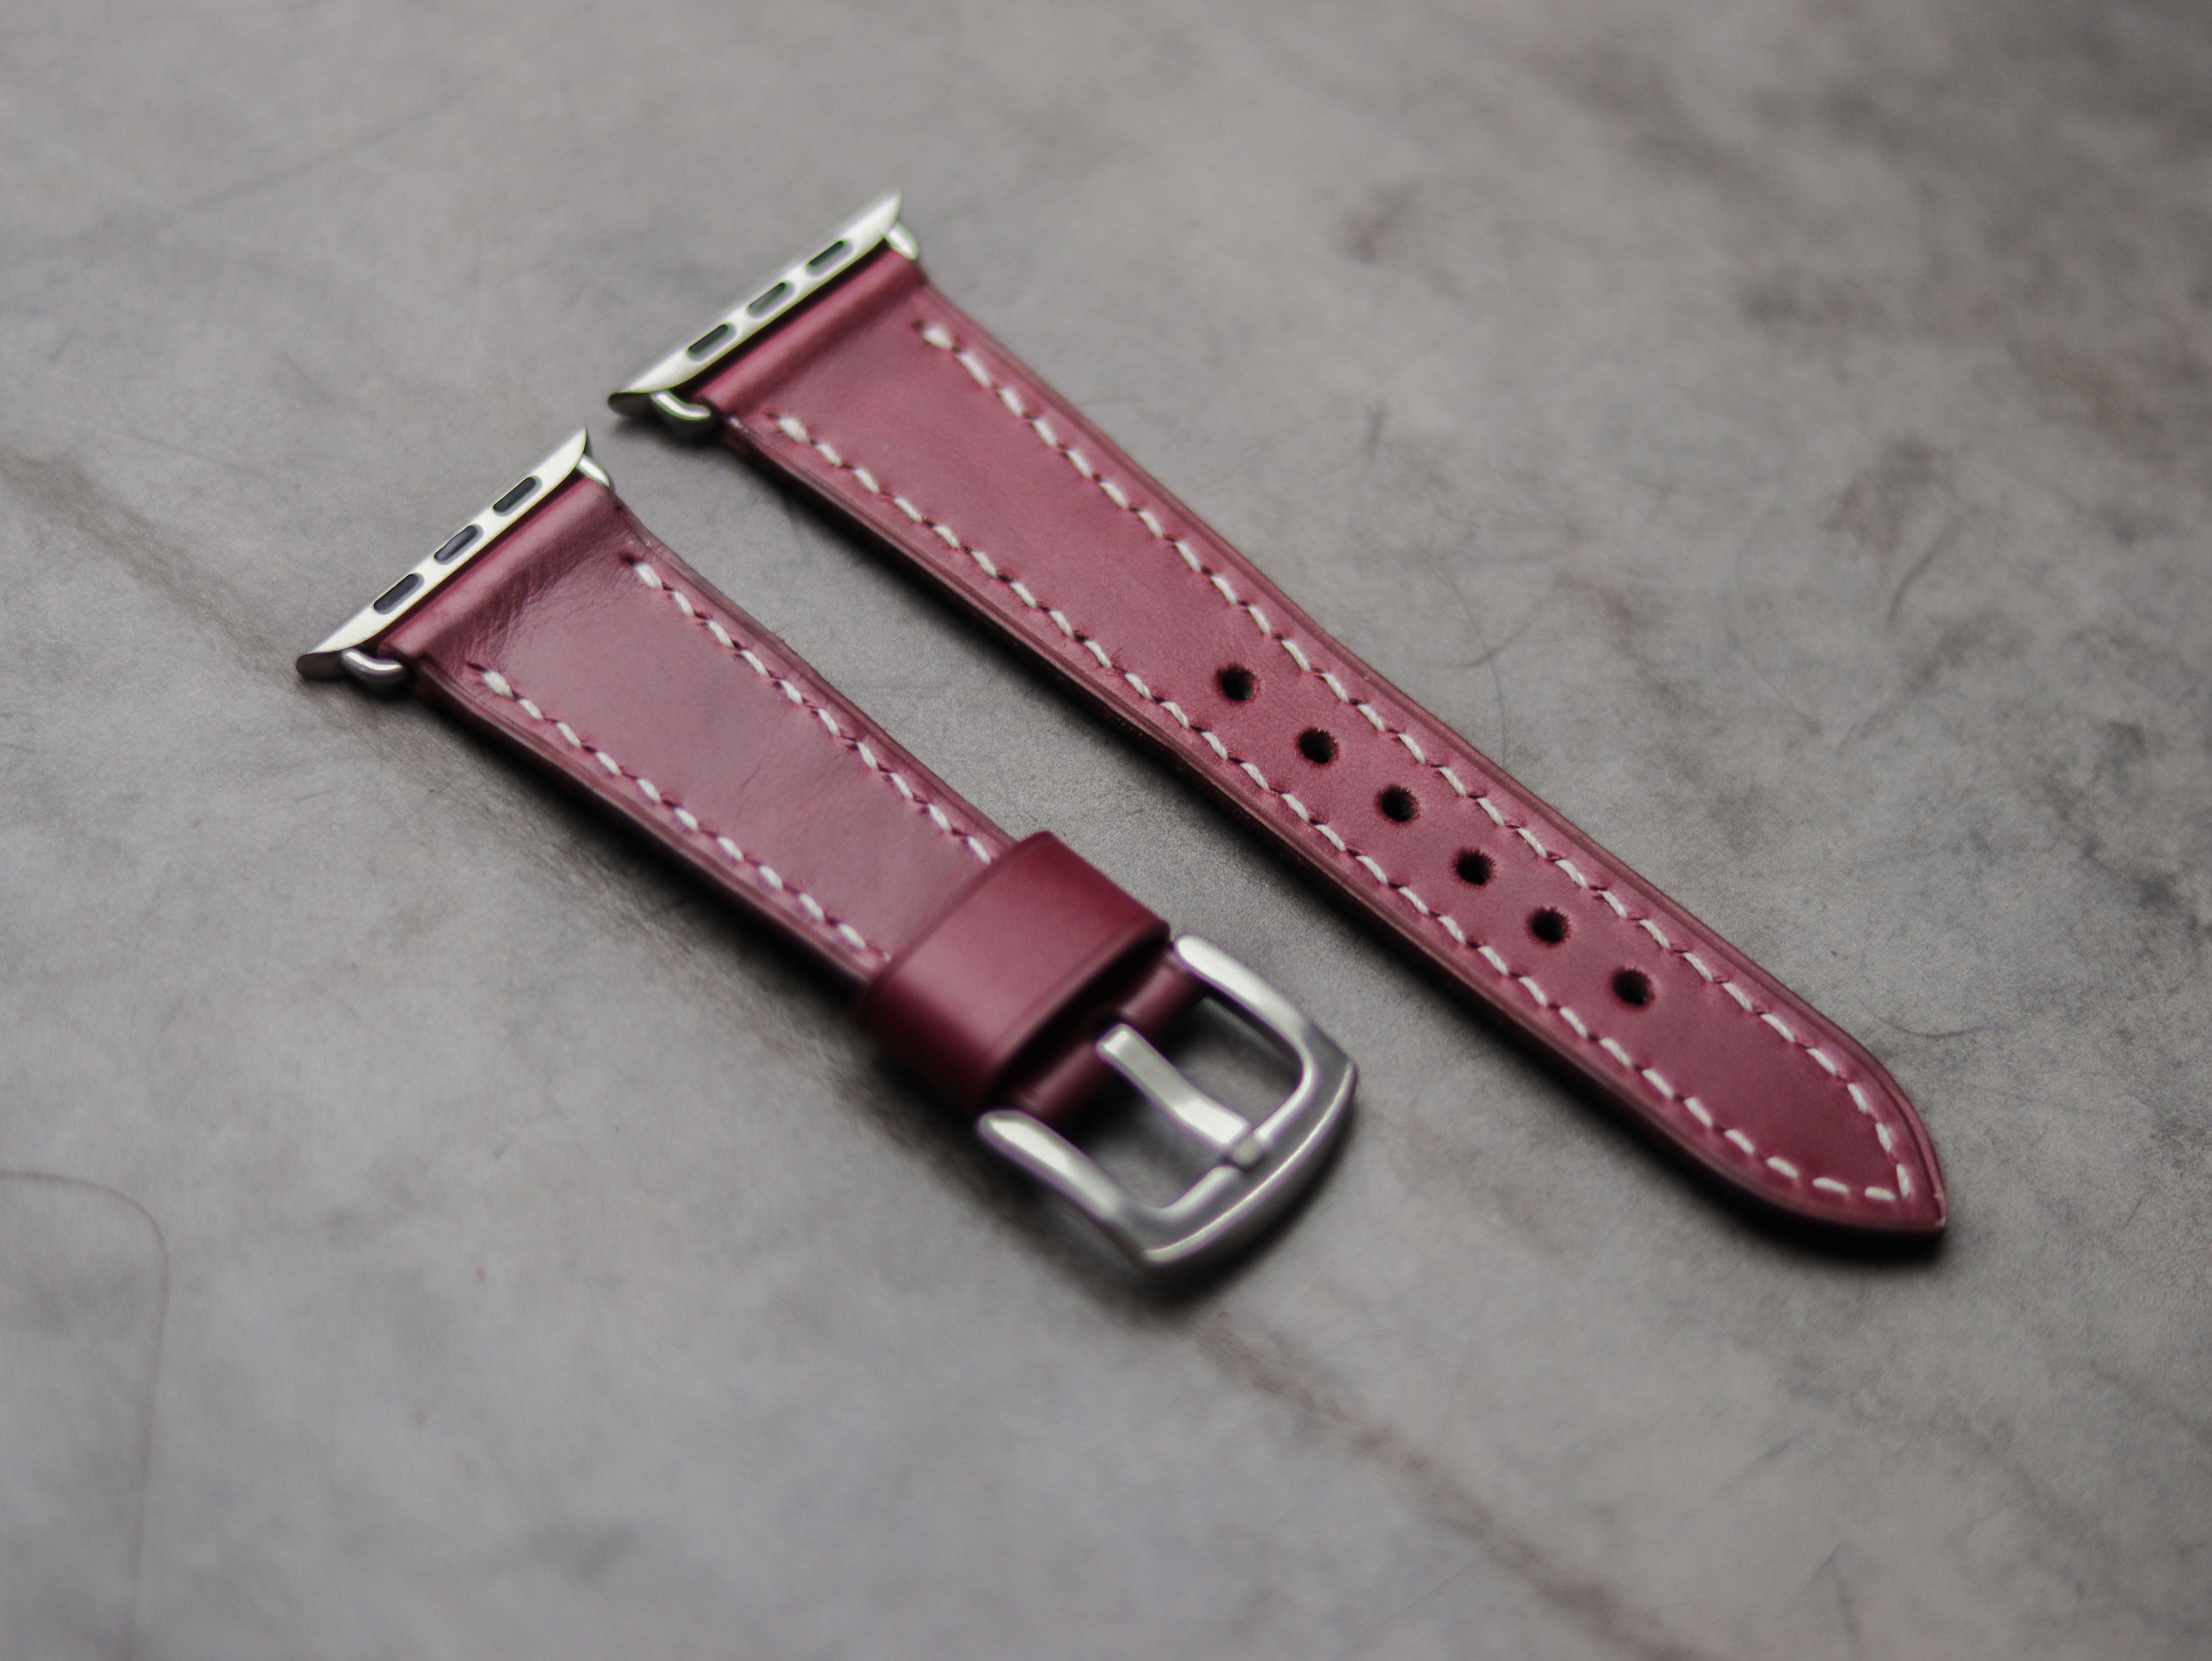 CARMINE BURGUNDY LEATHER - APPLE WATCH STRAPS HAND-CRAFTED